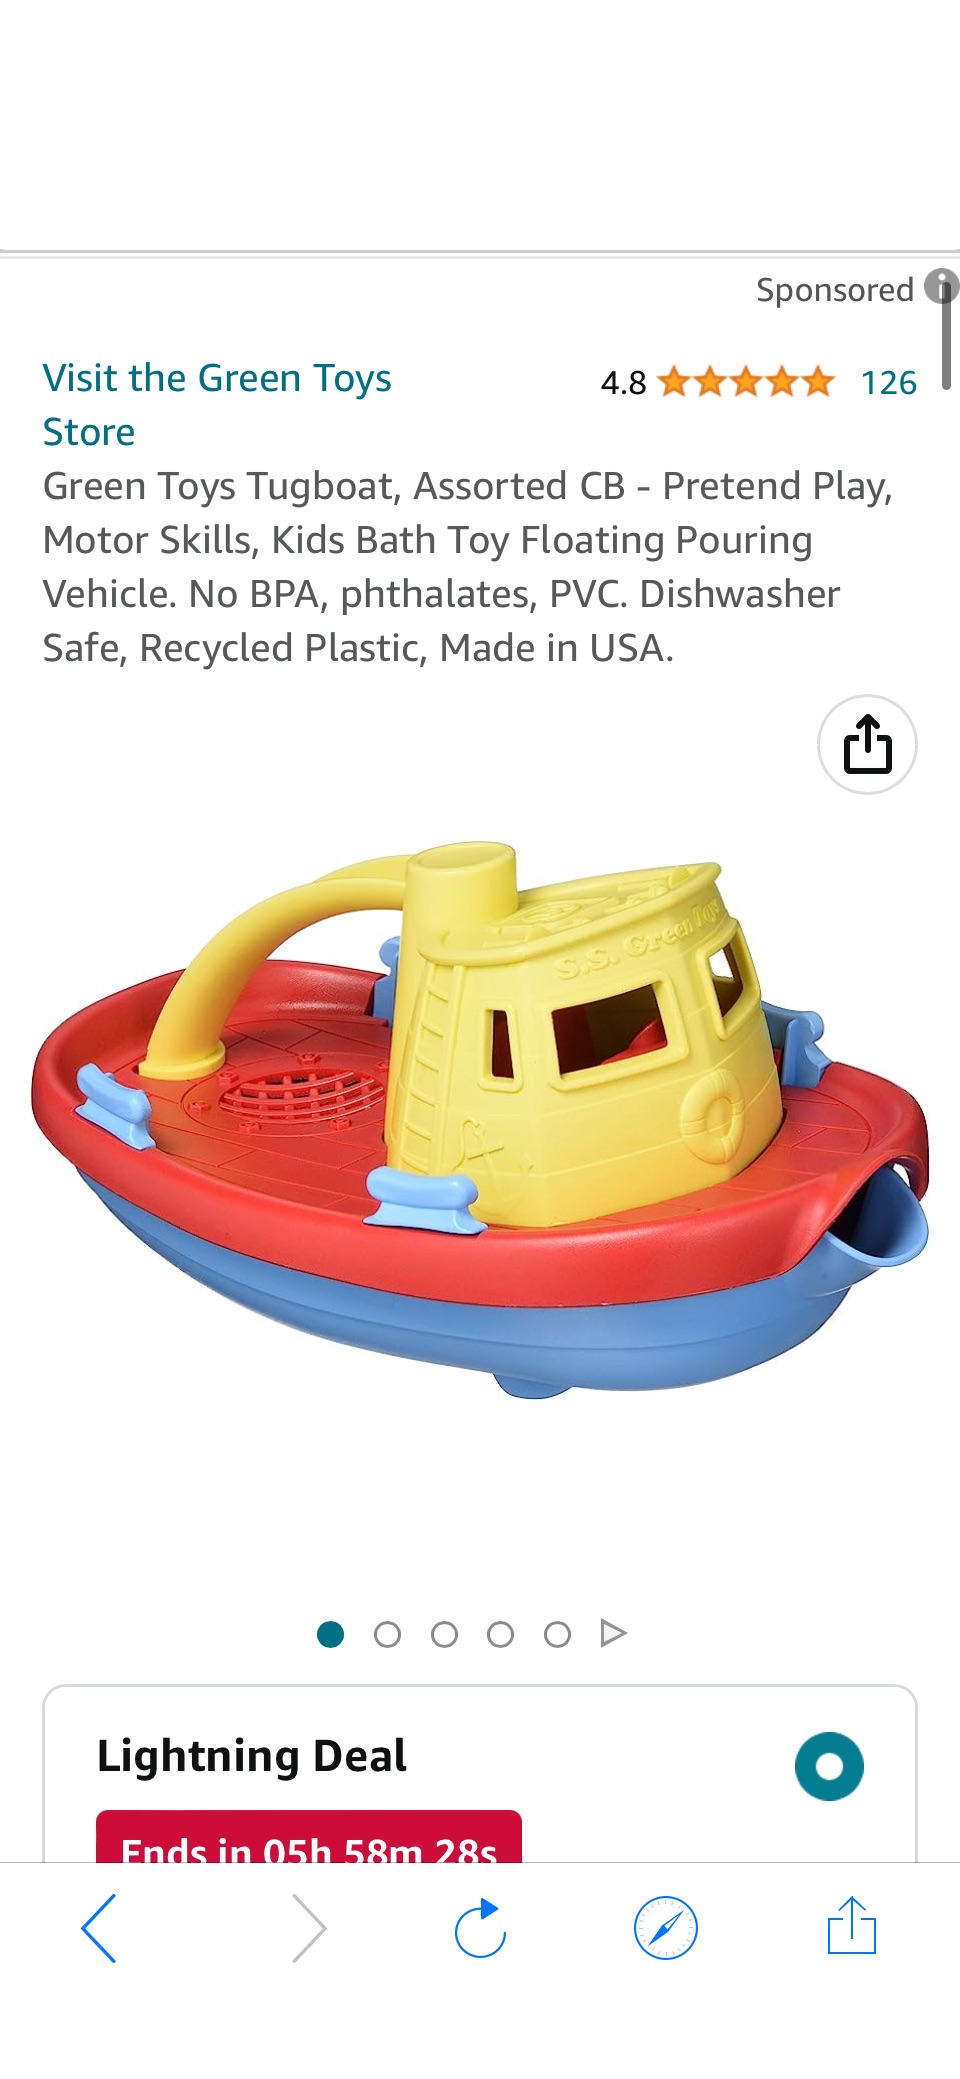 Amazon.com: Green Toys Tugboat, Assorted CB - Pretend Play, Motor Skills, Kids Bath Toy Floating Pouring Vehicle. No BPA,原价14.99